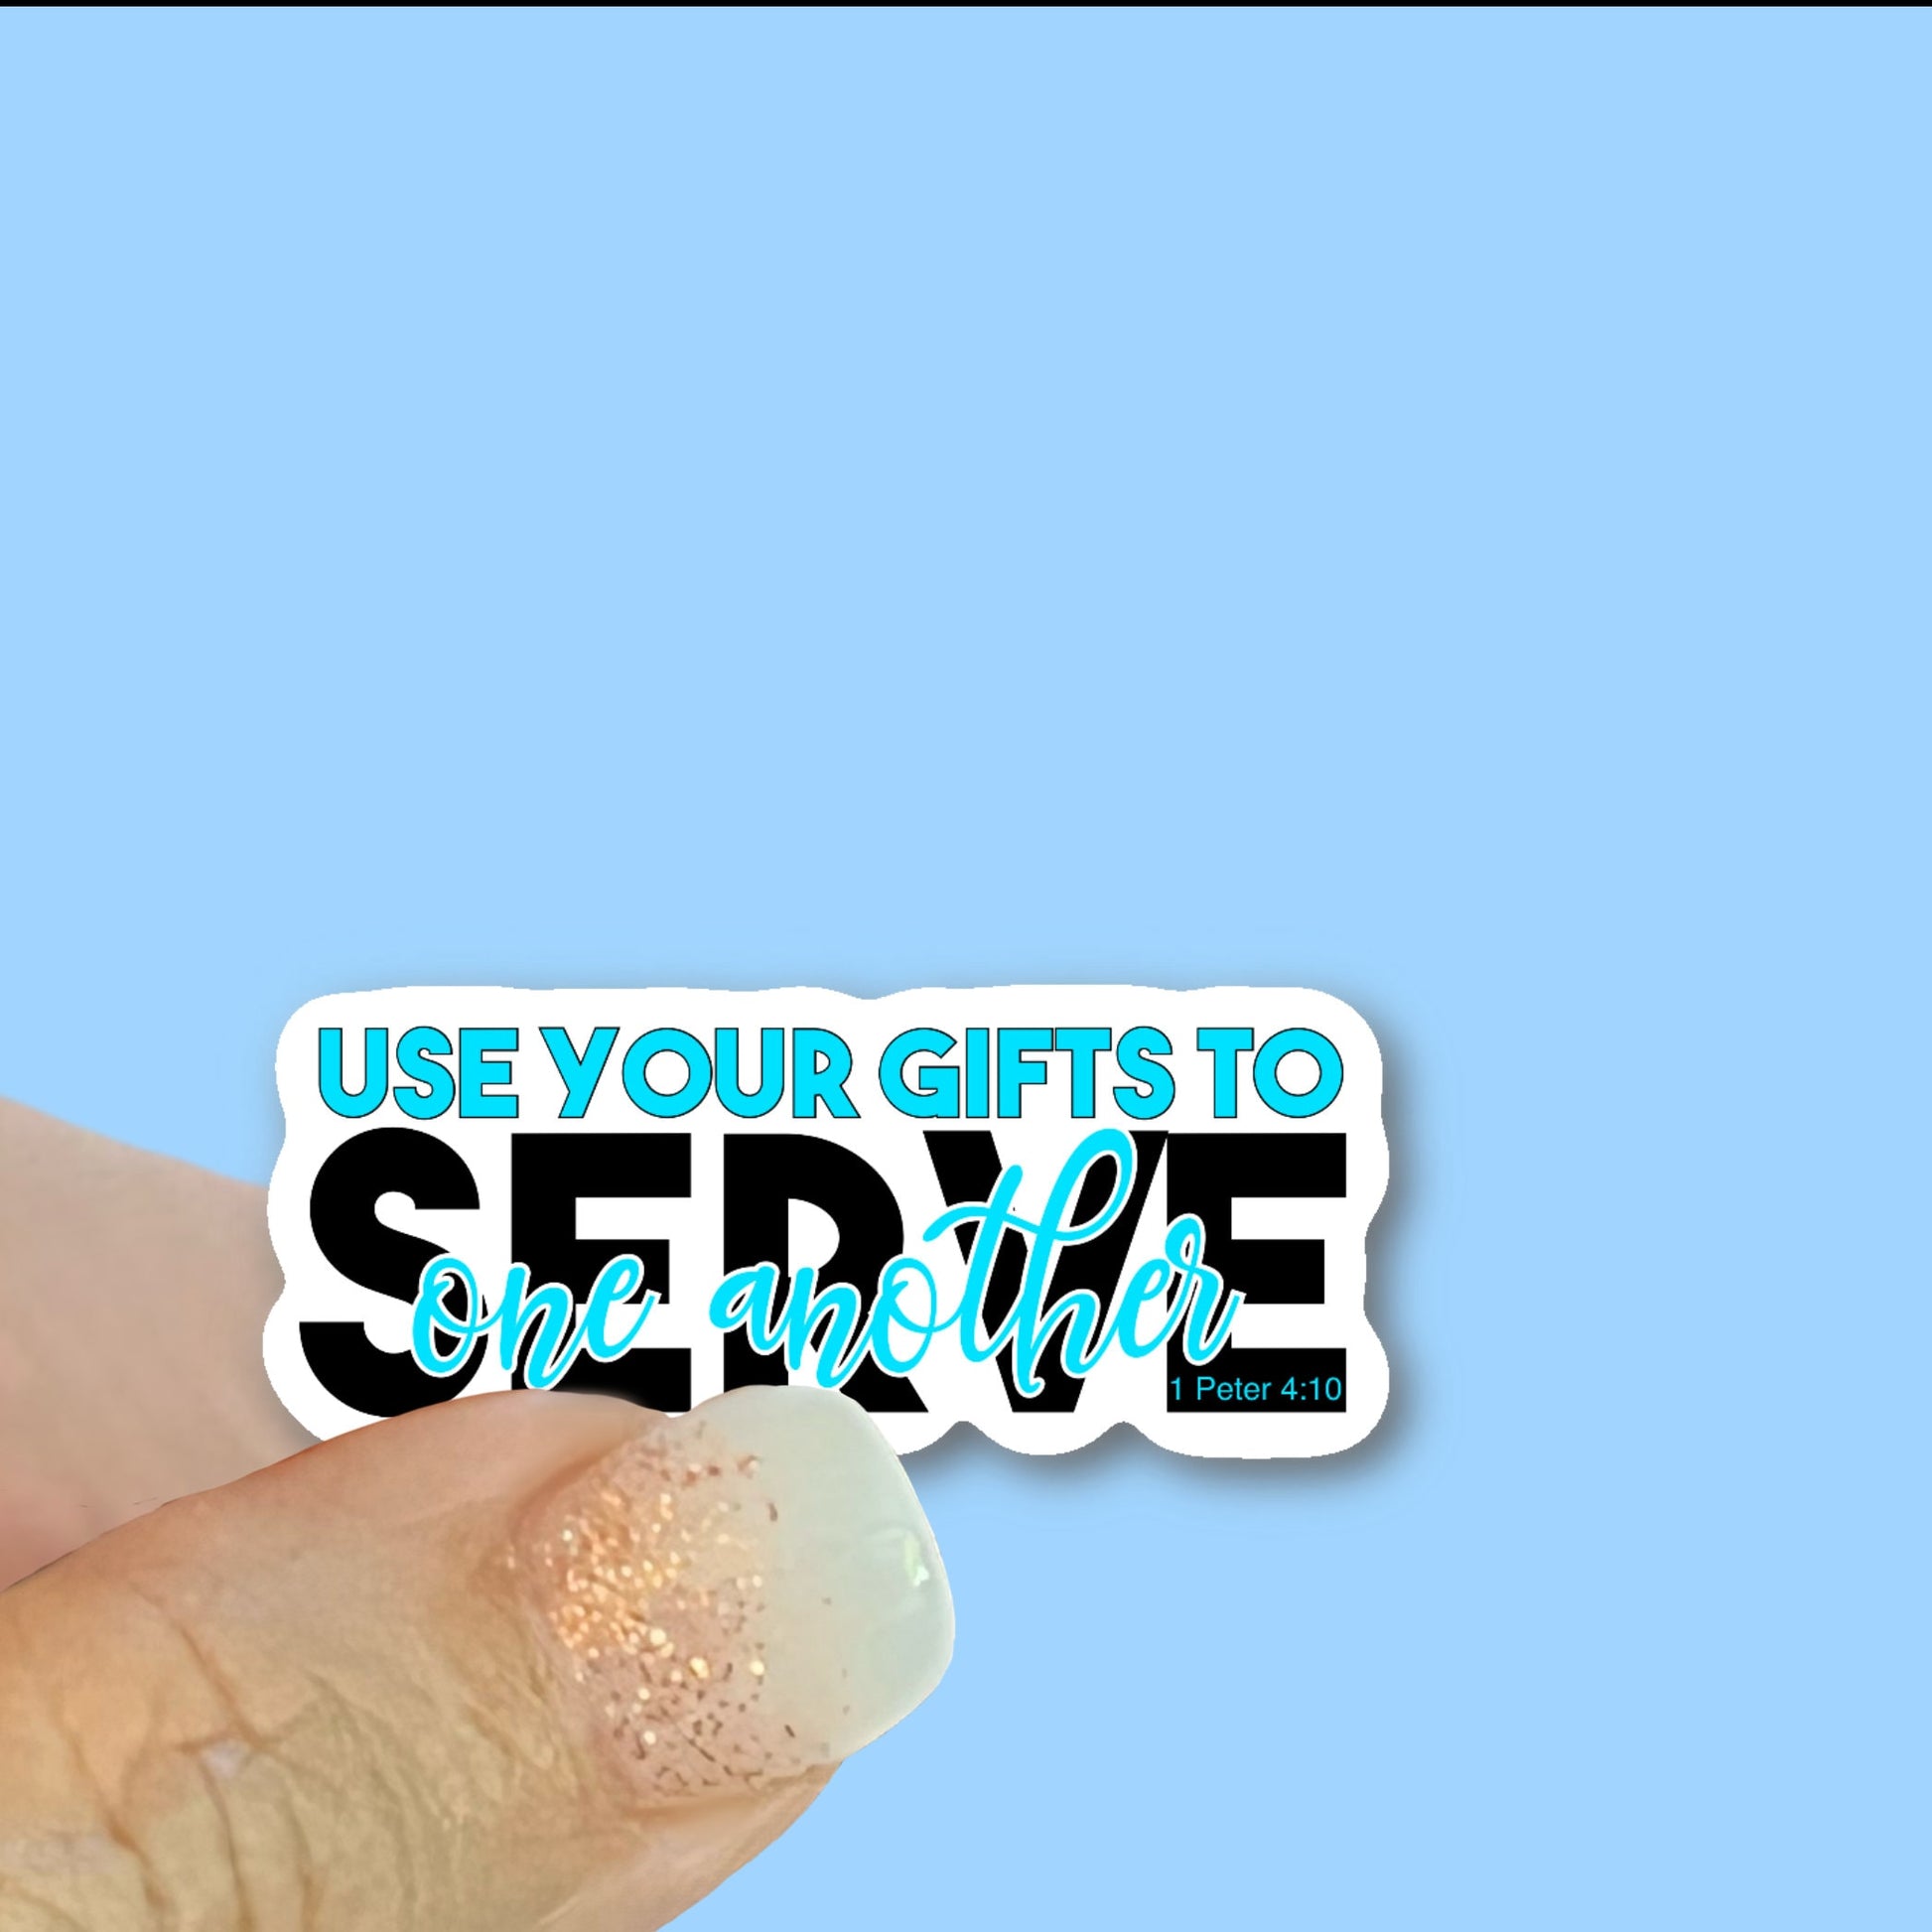 Use your gifts to Serve one Another - 1 Peter 4:10 - Christian Faith UV/ Waterproof Vinyl Sticker/ Decal- Choice of Size, Single or Bulk qty